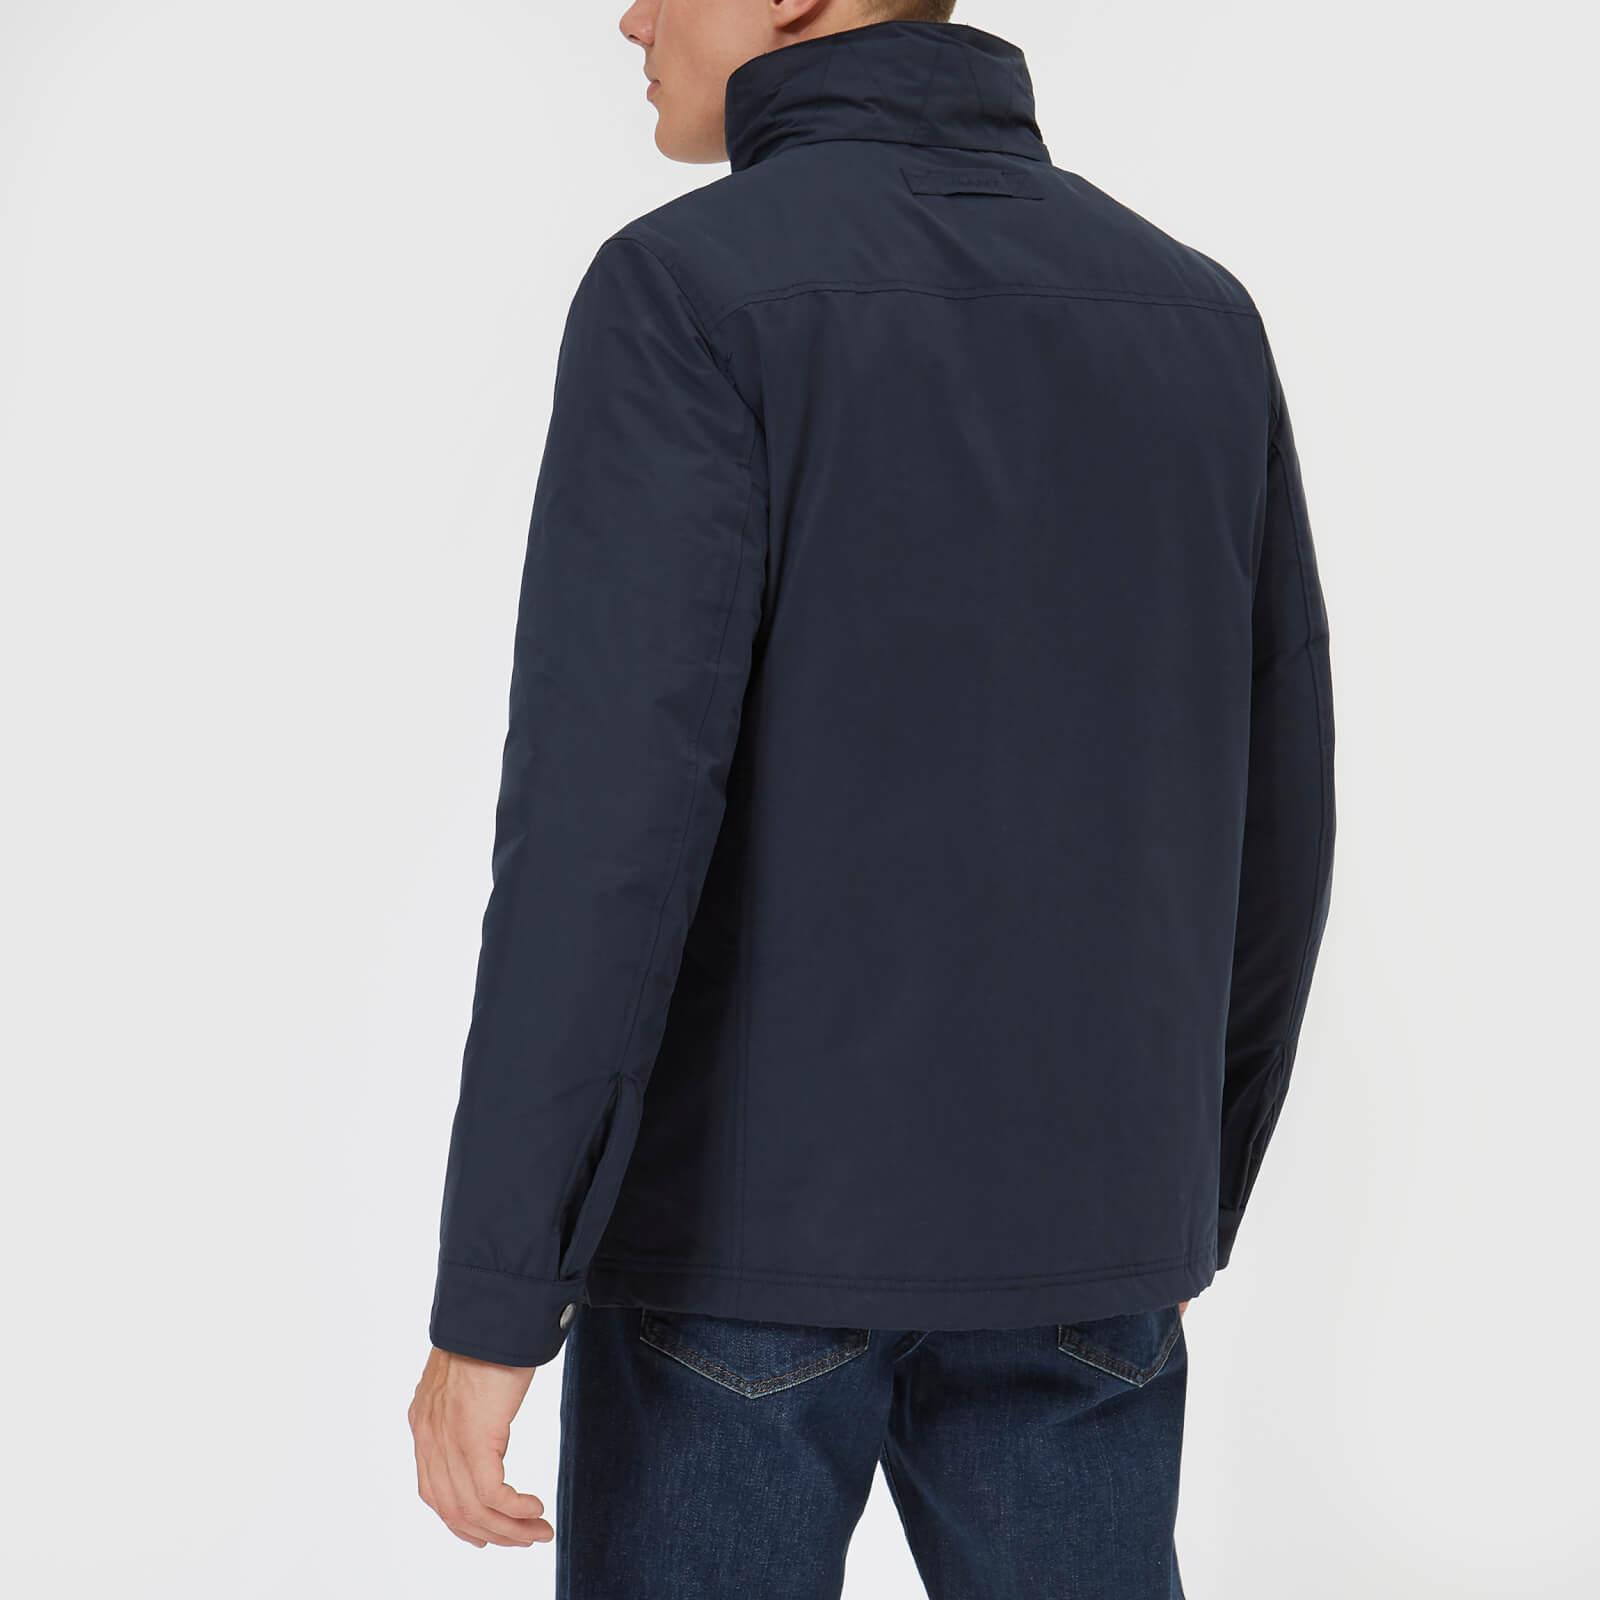 GANT Cotton The Midlength Jacket in Navy (Blue) for Men - Lyst